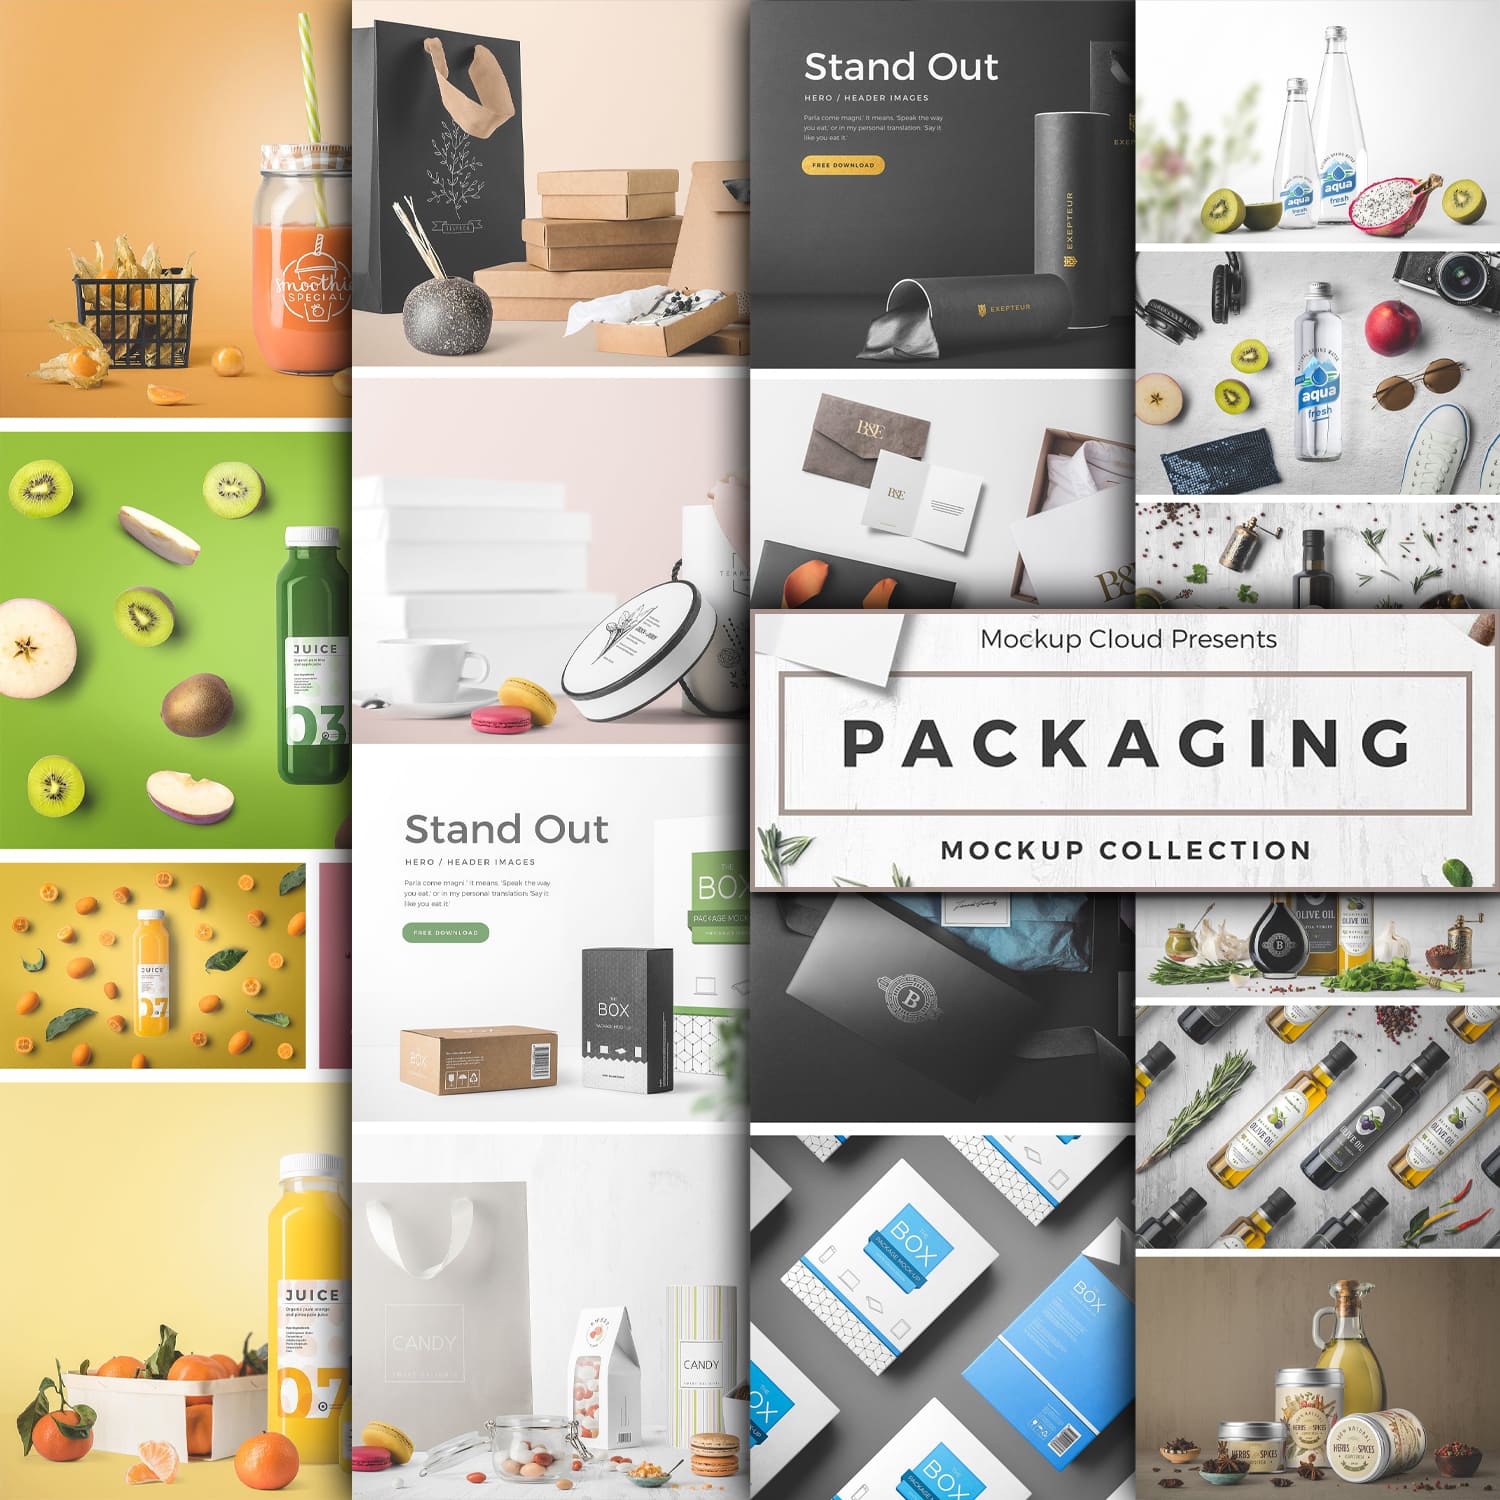 Preview packaging mockup collection.